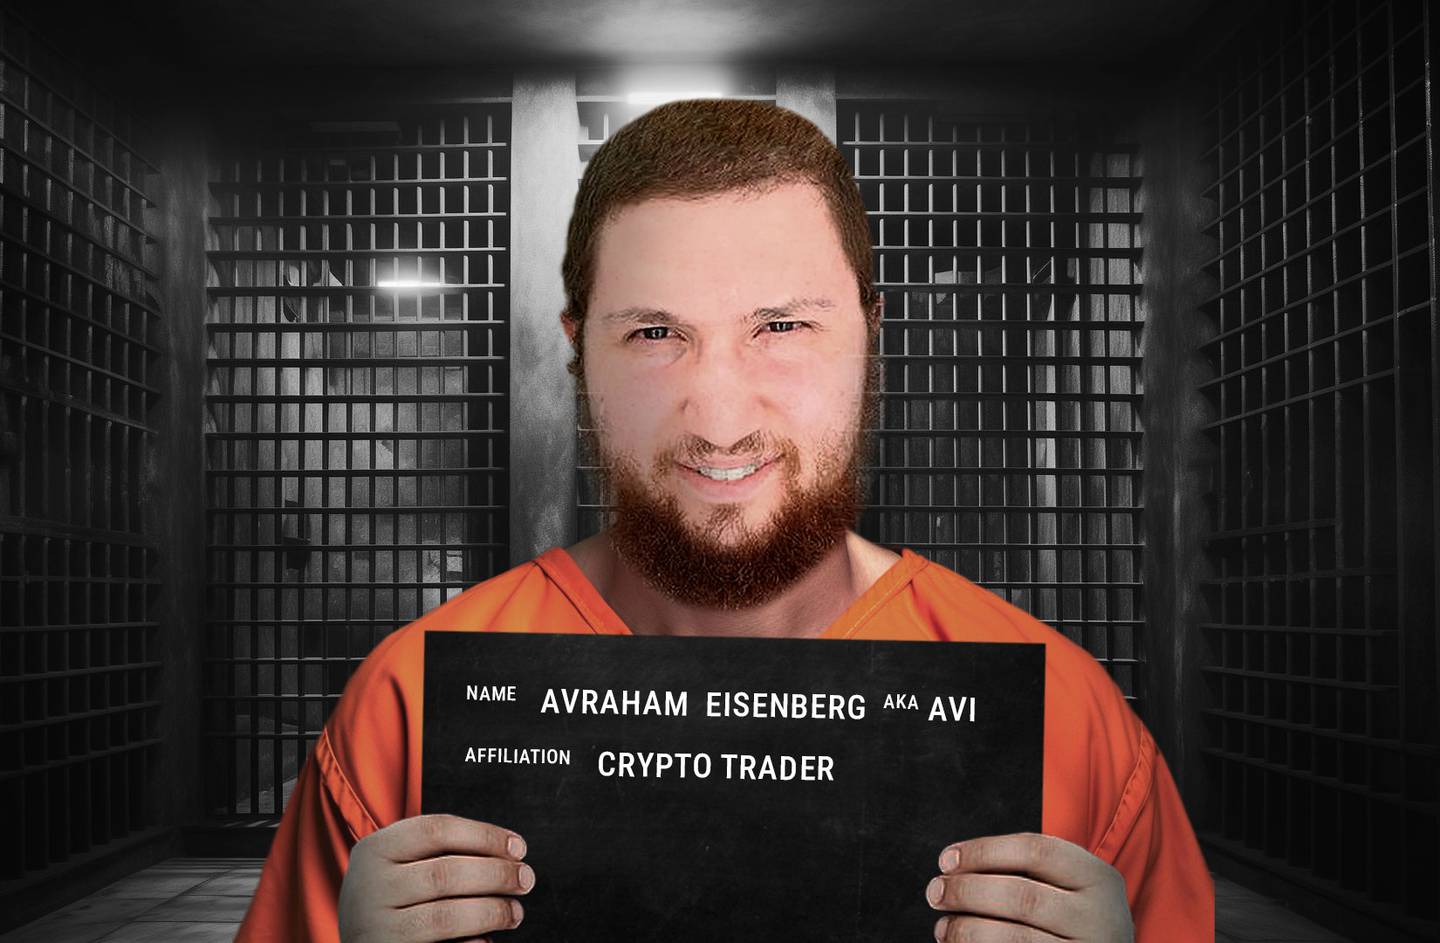 An illustration of Avraham Eiseinberg dressed as a prisoner with a jail background.